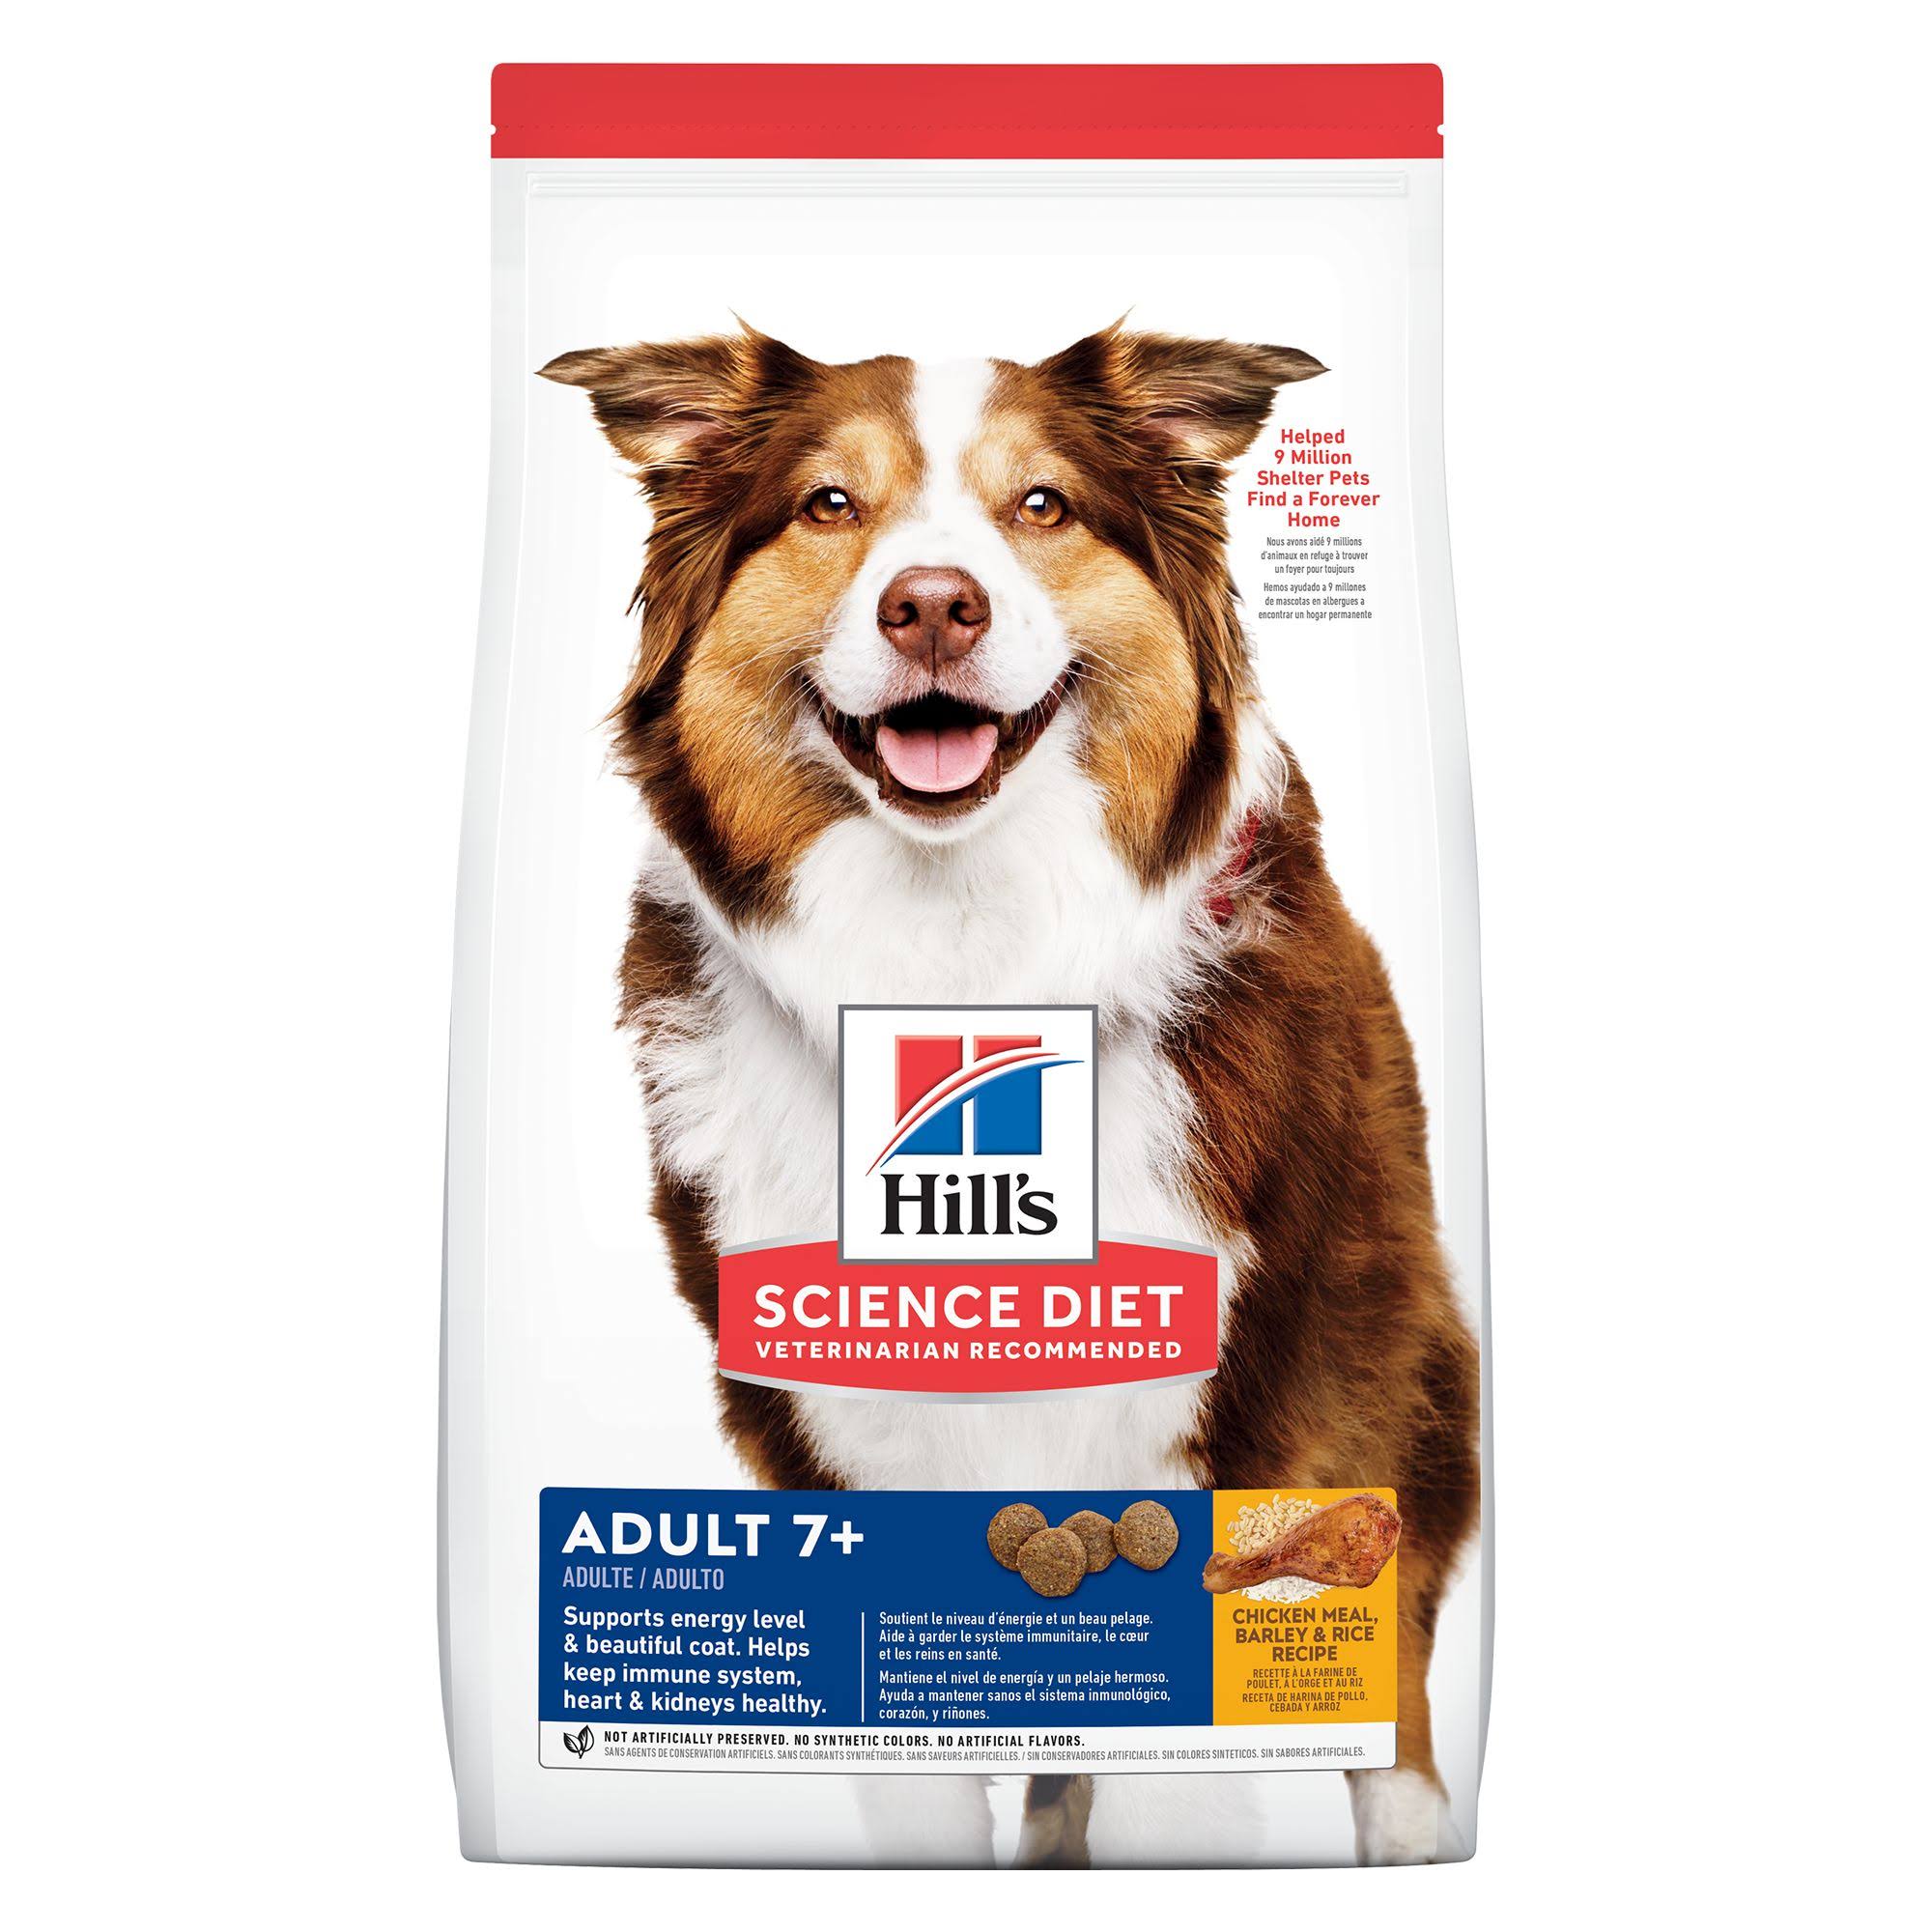 Hill's Science Diet Adult Senior 7+ Dry Dog Food - Chicken Meal, Rice and Barley, size: 15 lbs | PetSmart